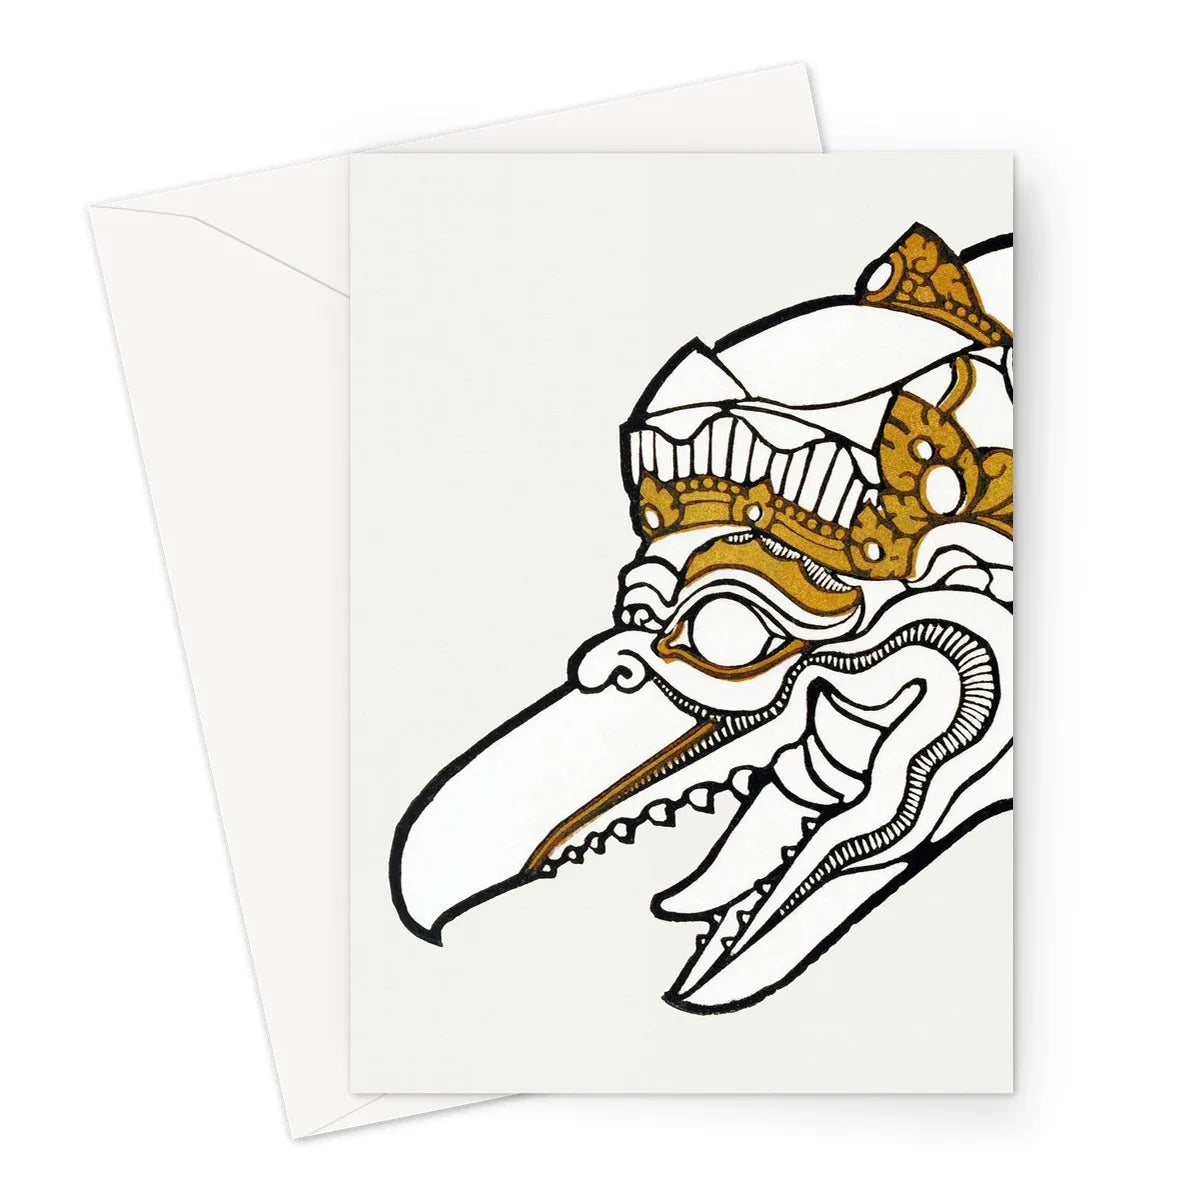 Head Of Garuda By Reijer Stolk Greeting Card - A5 Portrait / 1 Card - Greeting & Note Cards - Aesthetic Art